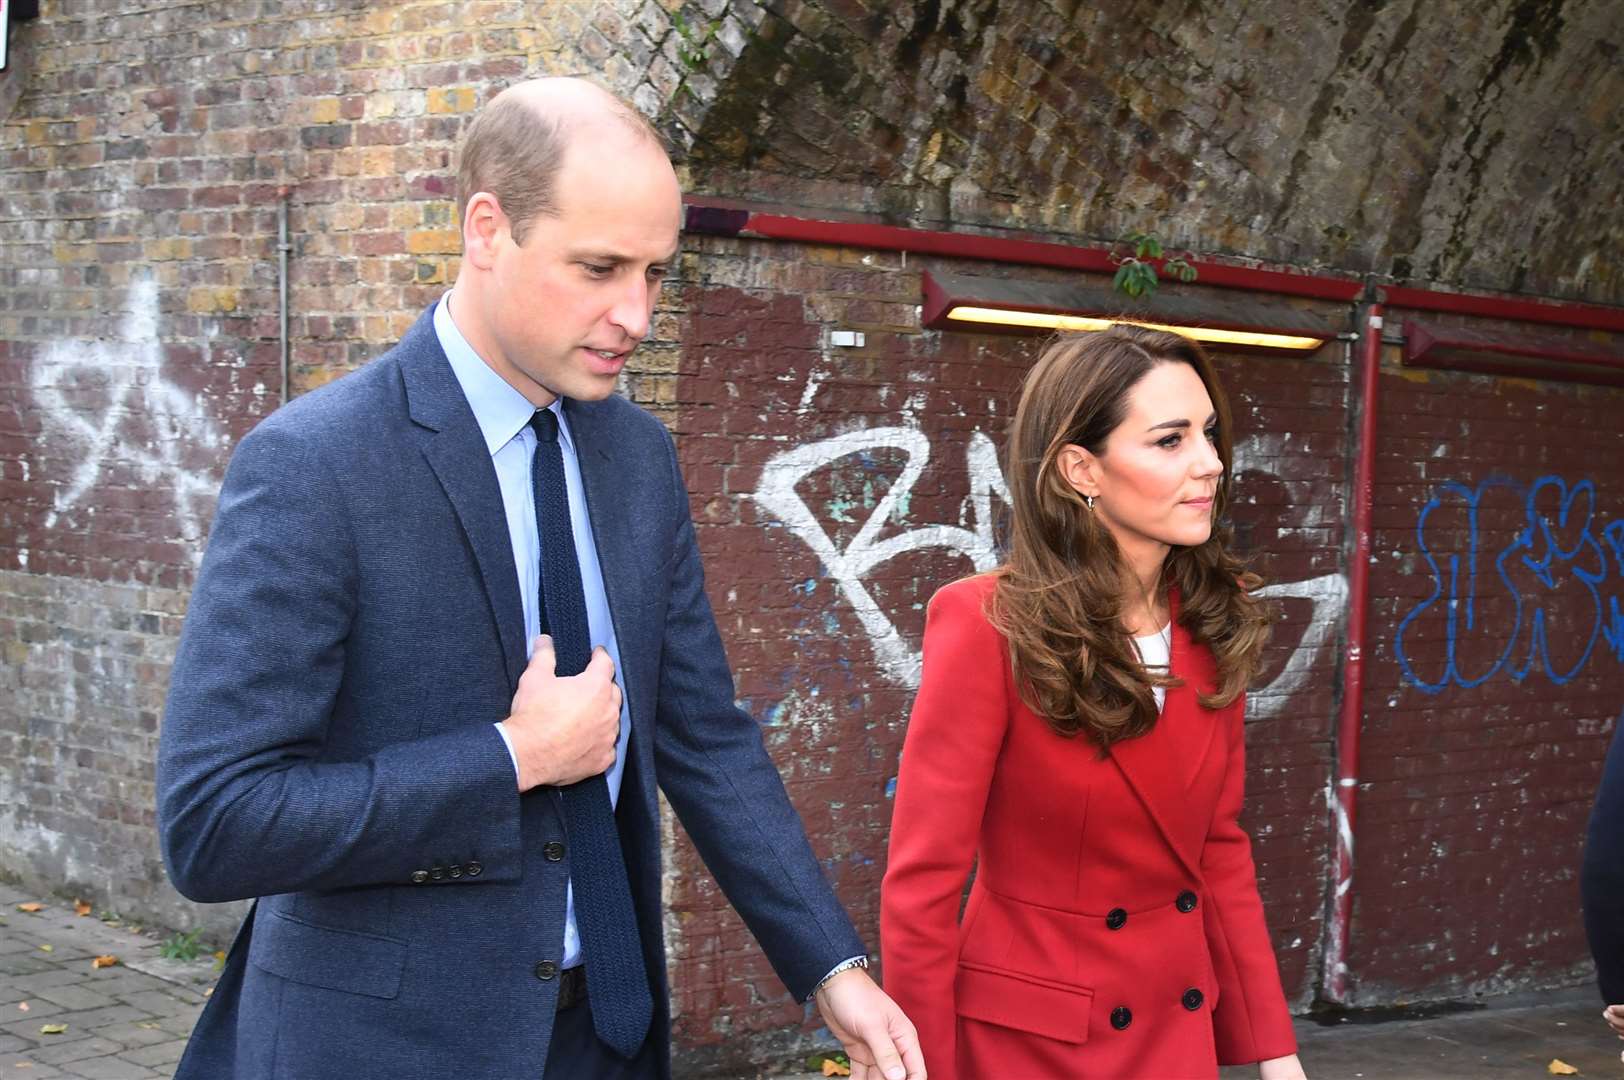 The Duke and Duchess of Cambridge viewed some of the images from the Hold Still photography project at Waterloo station in London (Evening Standard/Jeremy Selwyn/PA)